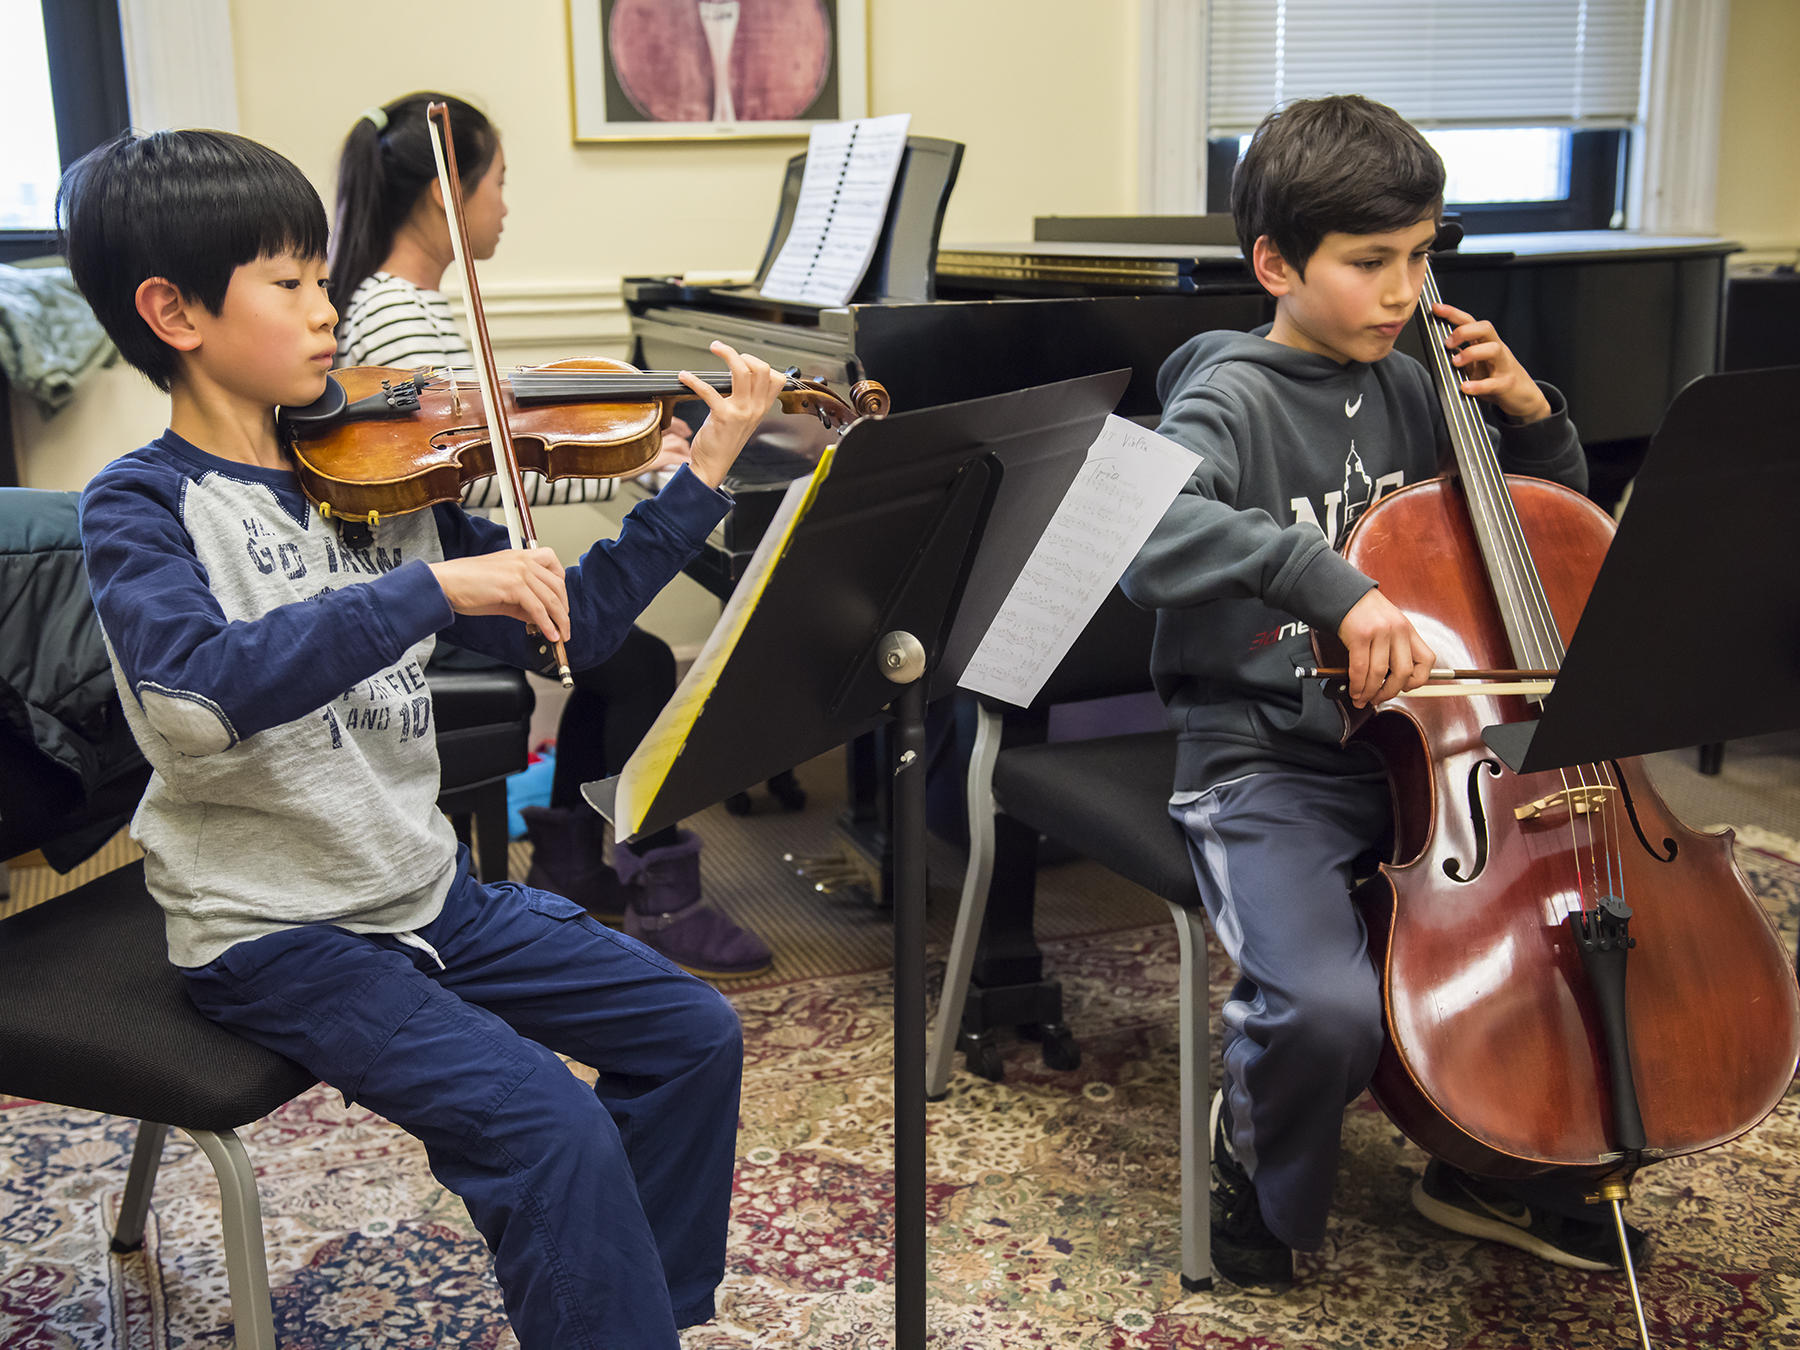 A Prep chamber music group rehearses